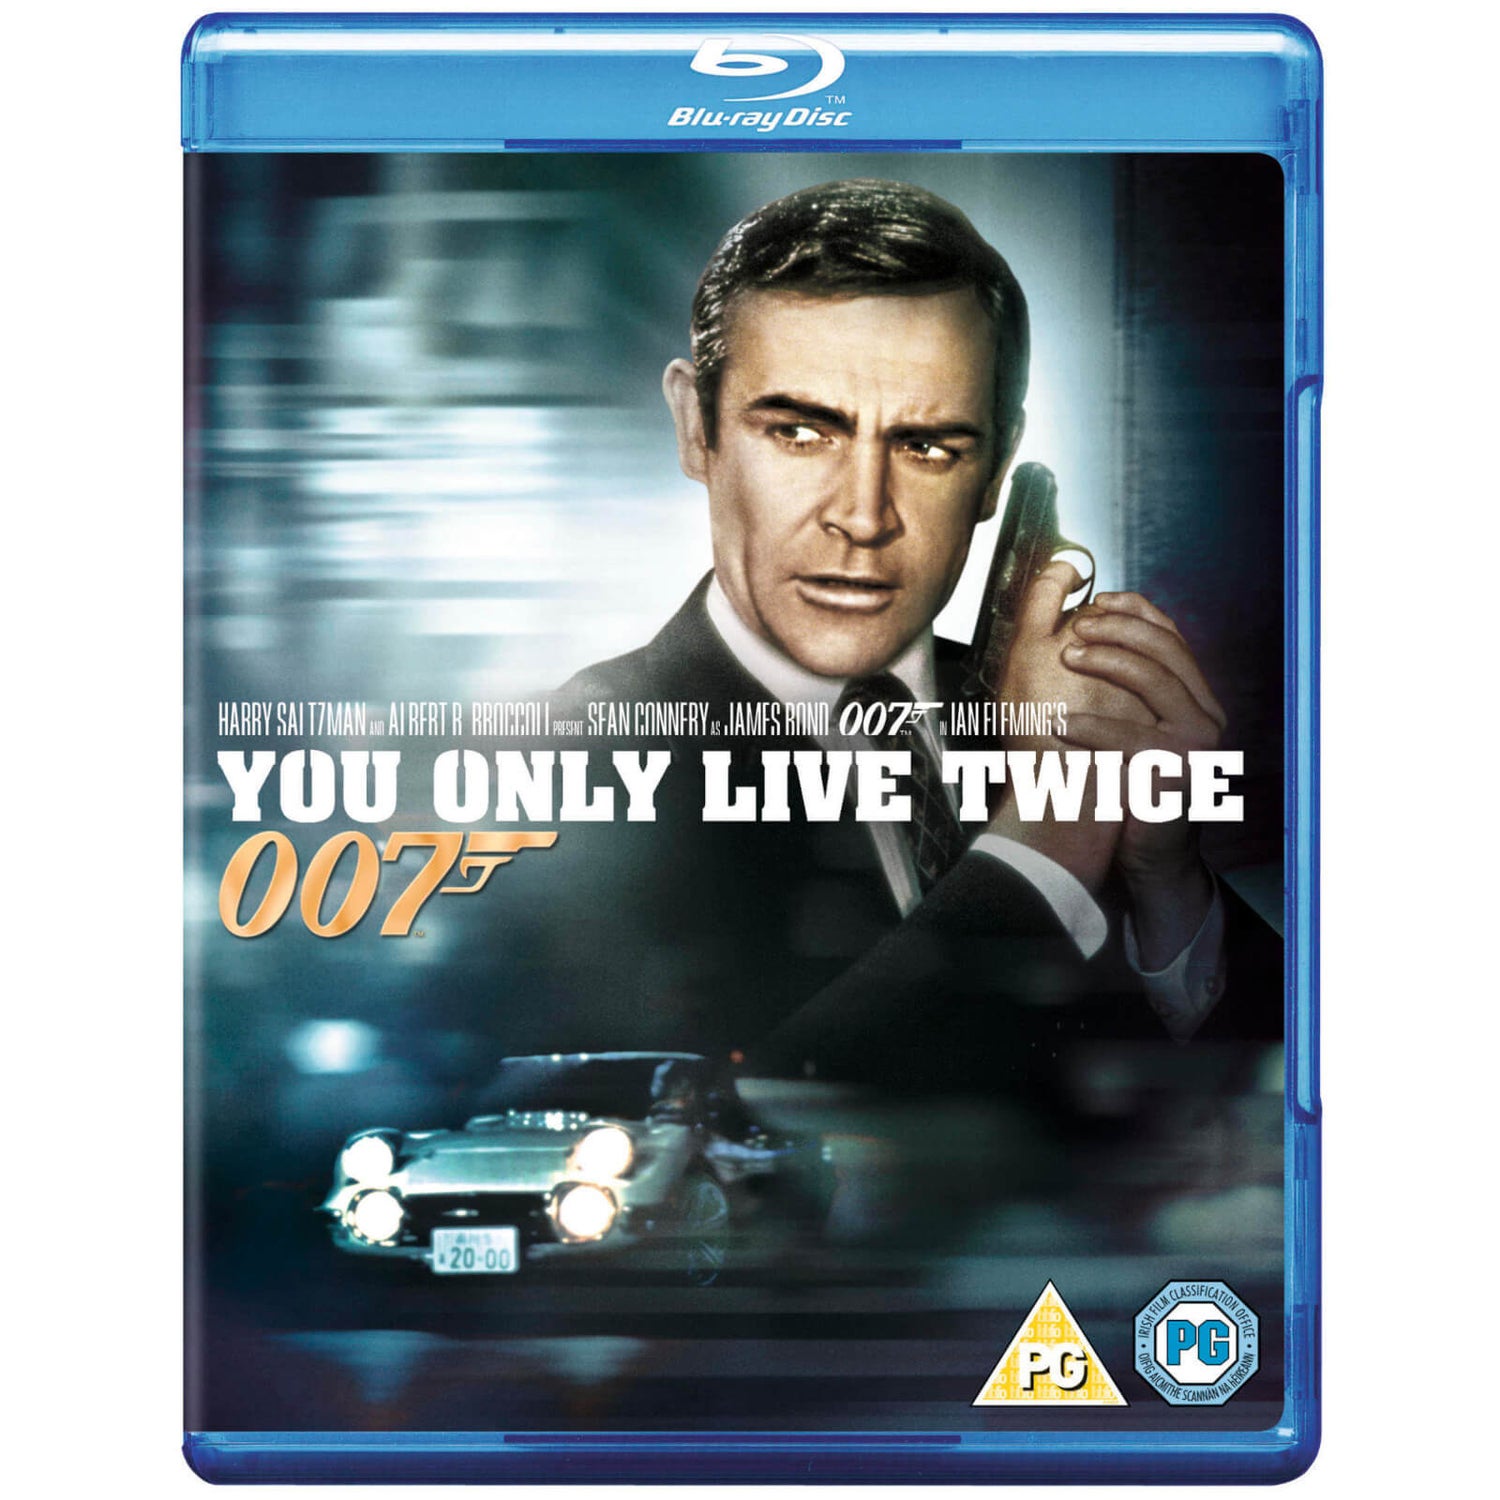 You Only Live Twice (Inclusief HD UltraViolet kopie)